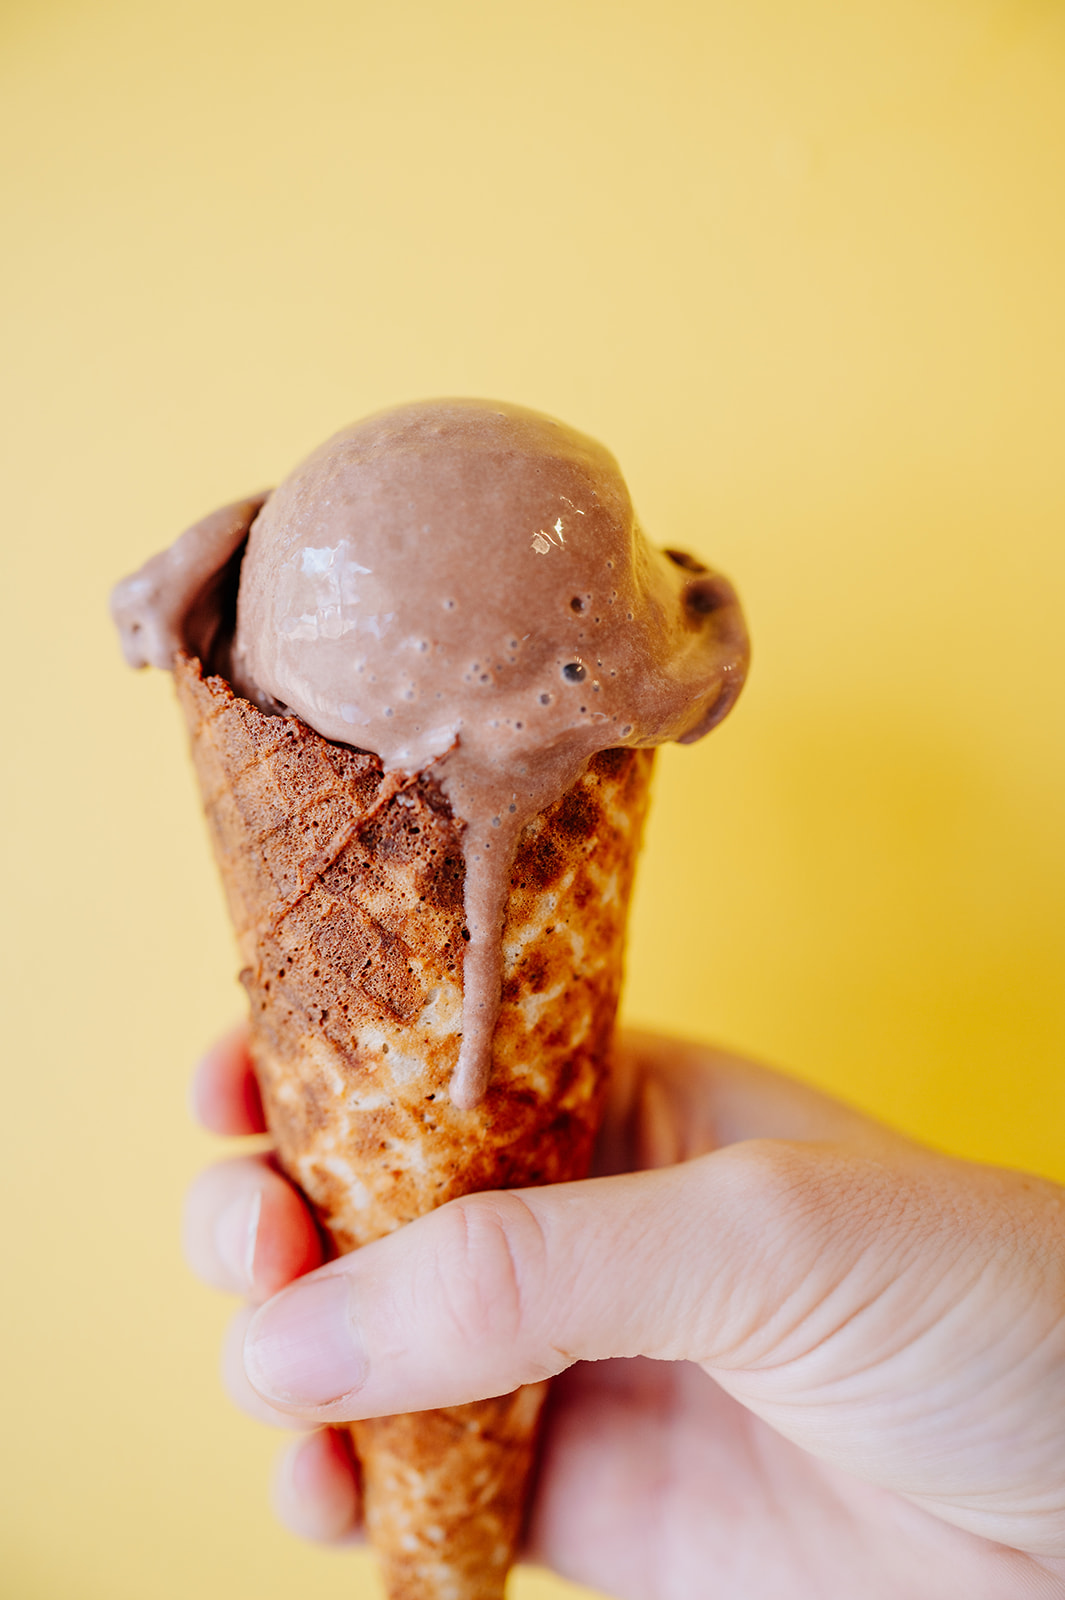 Chocolate Ice cream in a cone melting. With a yellow background 